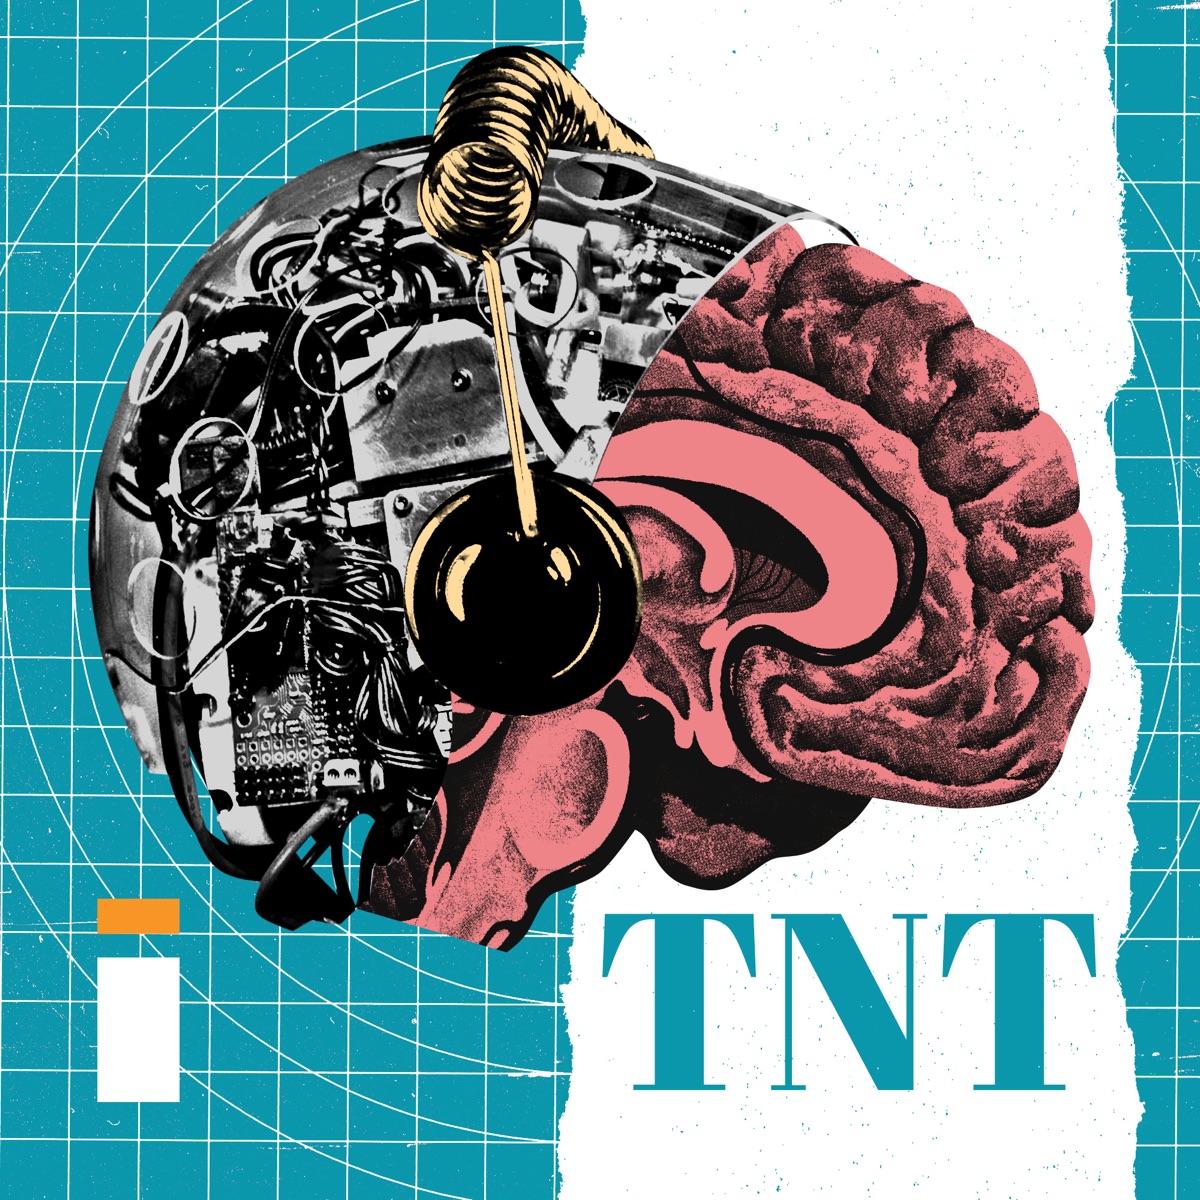 Tnt for the brain. Подкаст ТНТ.